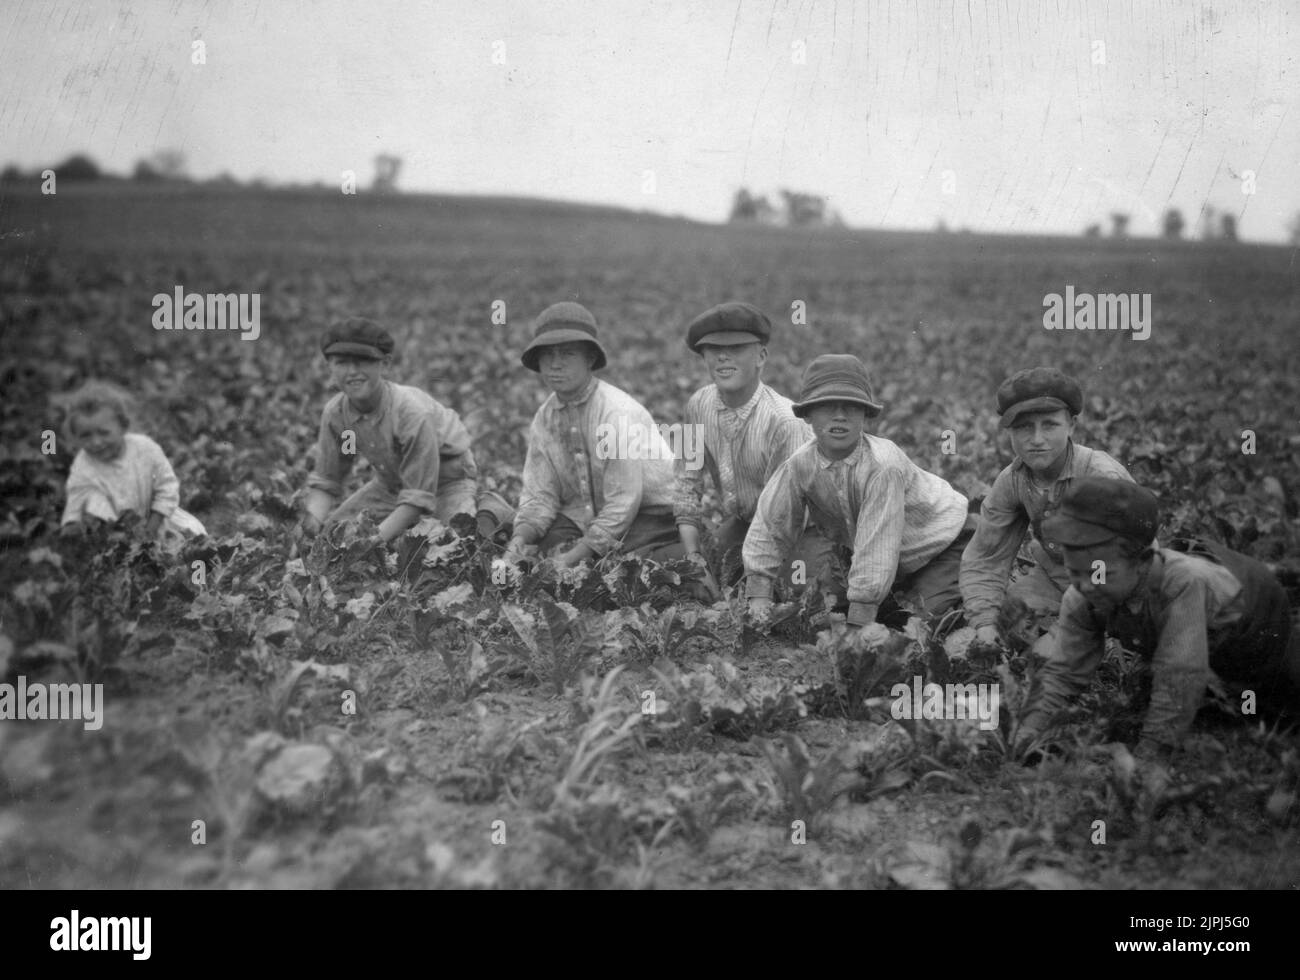 Children working in the sugar beets for Louis Startz, a farmer near Fond du Lac, Wisconsin. The children are brought out from the nearby town to work the beets. See Hine Report, Wisconsin Sugar Beet, July, 1915. By Lewis Wickes Hine Stock Photo